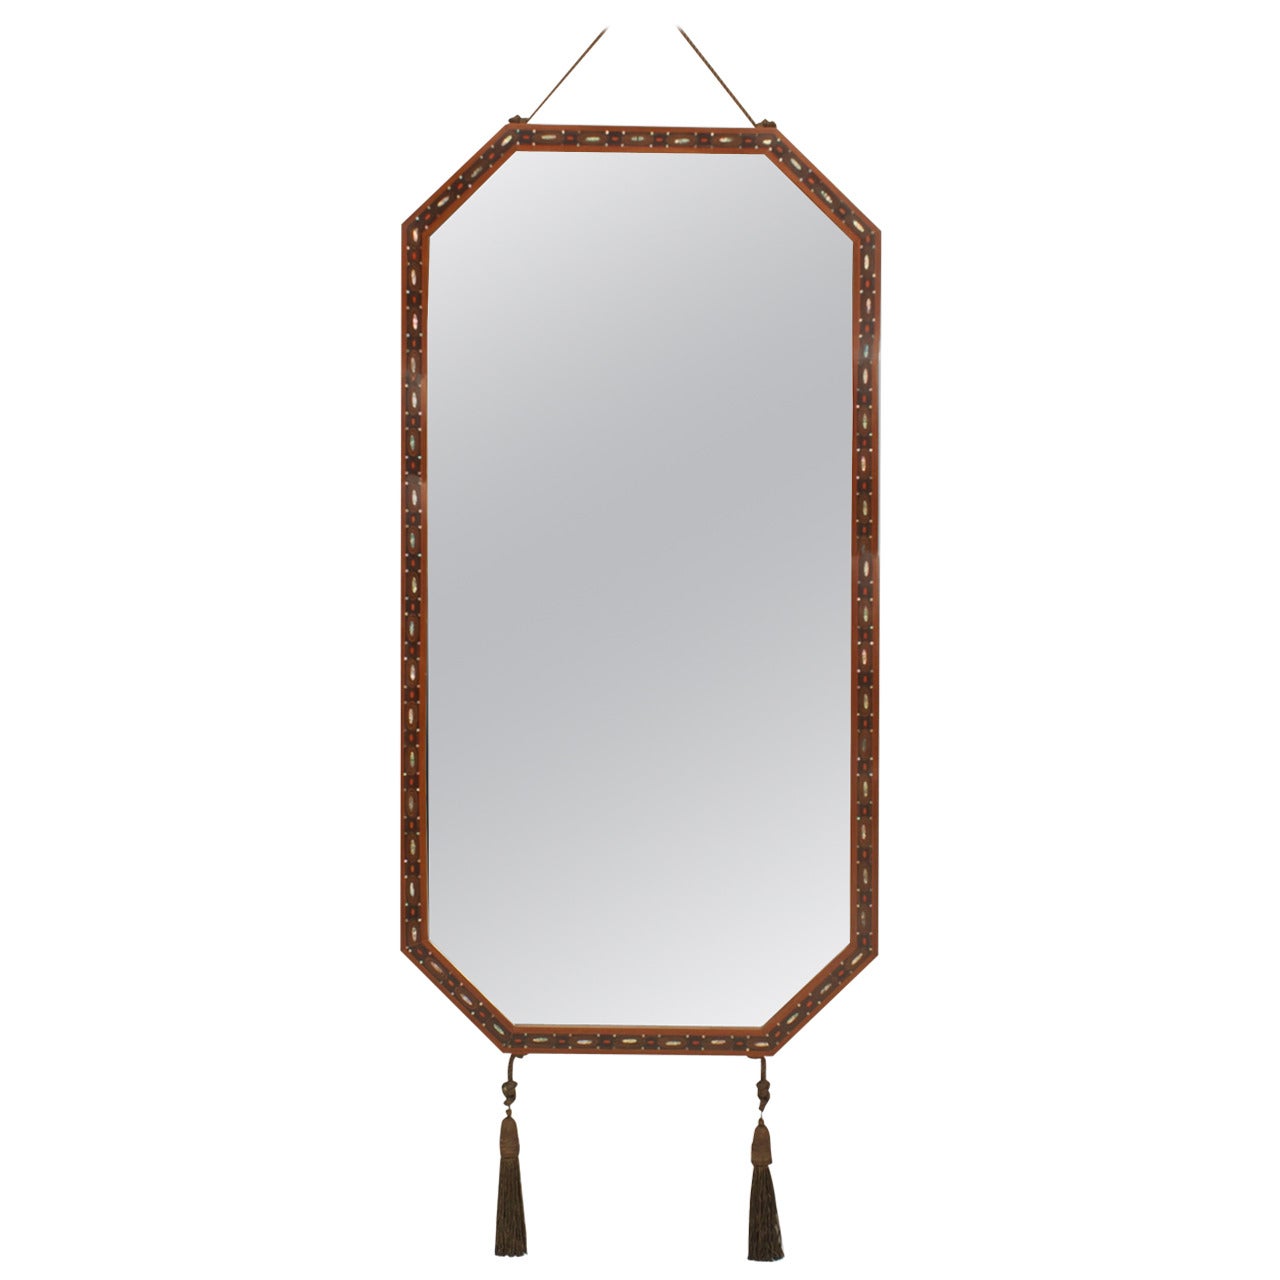 French Art Deco Inlaid Mahogany Mirror by Maurice Dufrene